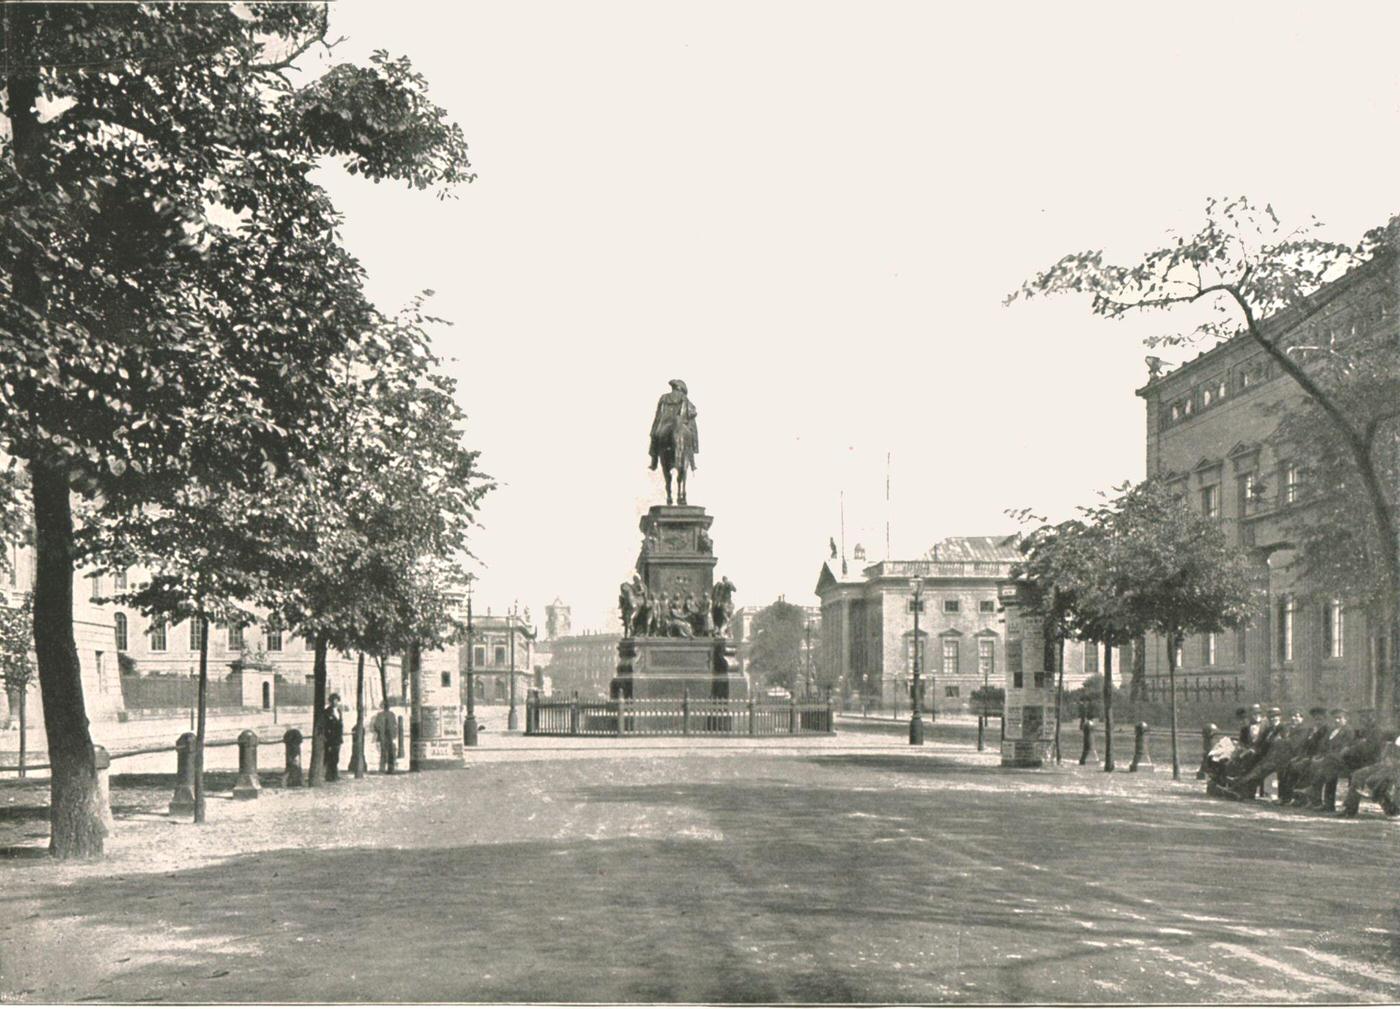 Statue of Frederick the Great, Berlin, 1895.